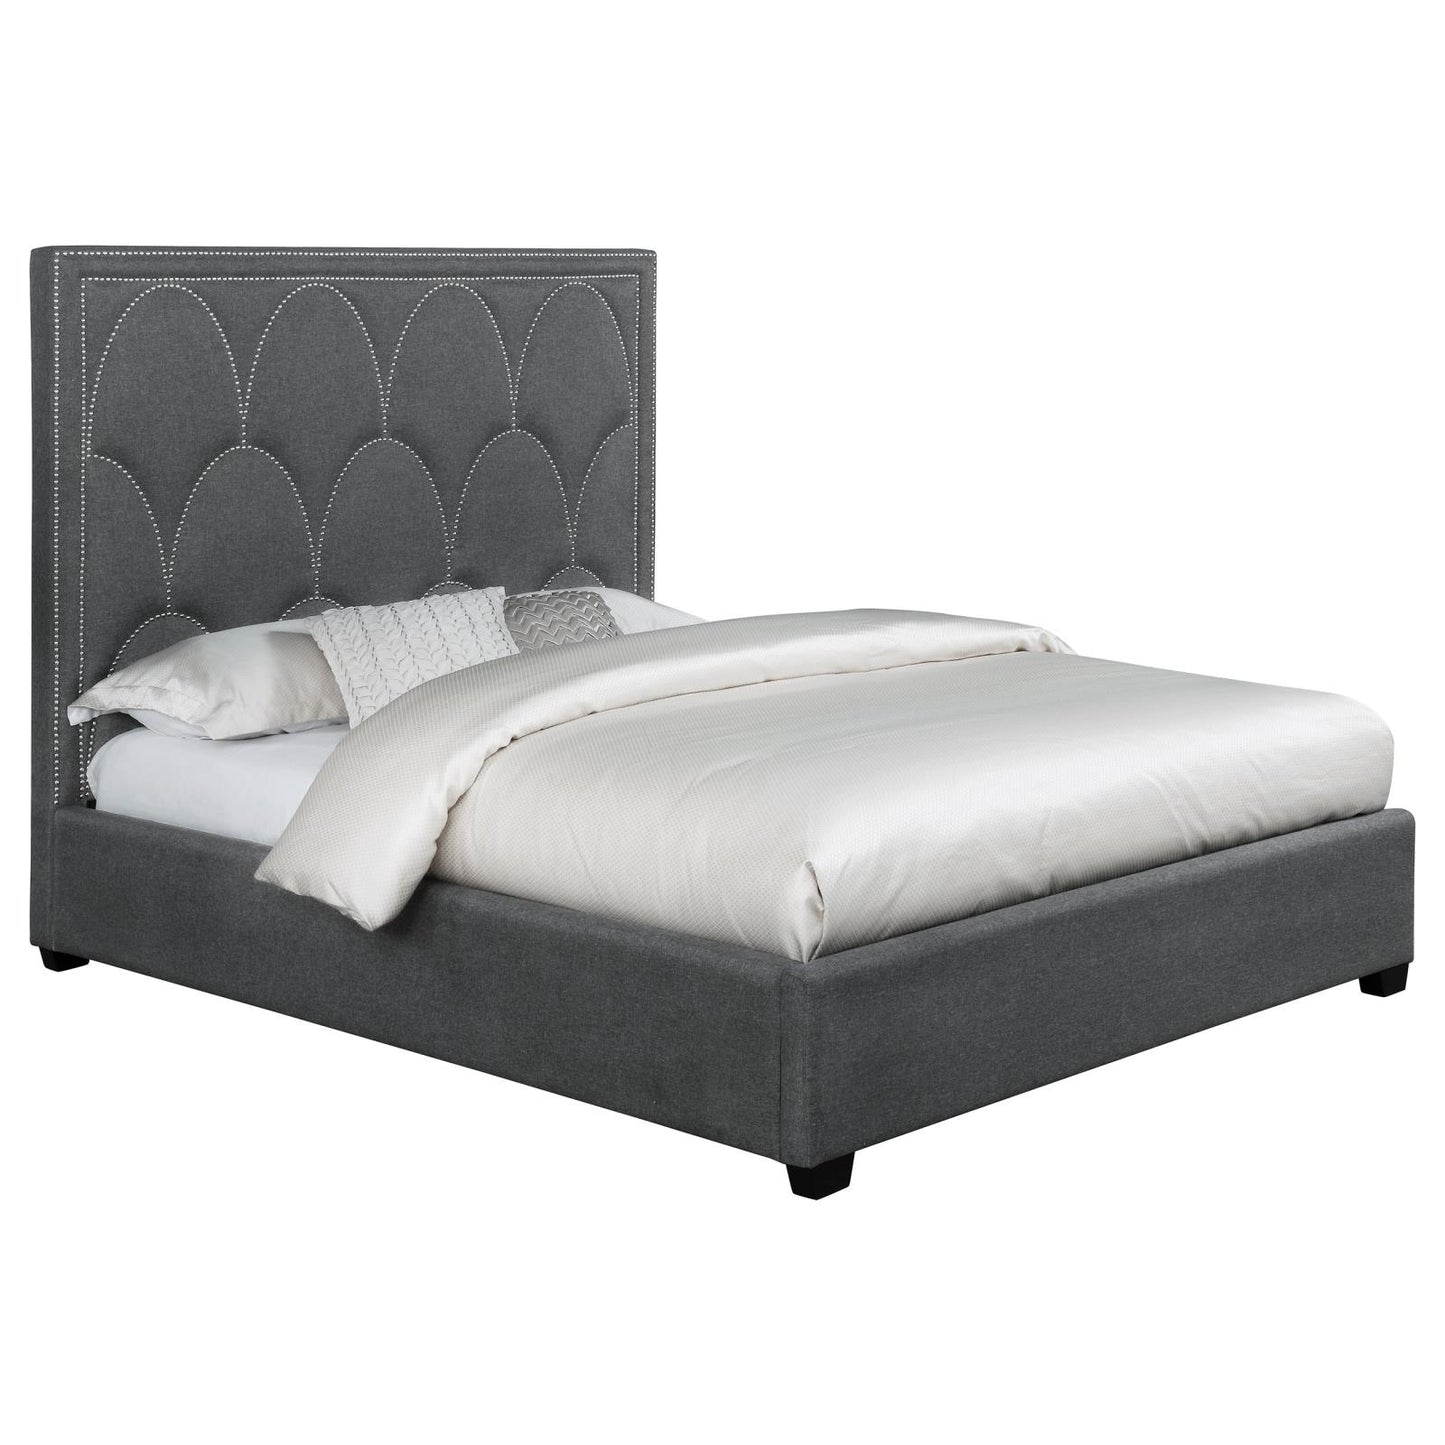 Bowfield Upholstered Bed with Nailhead Trim Charcoal